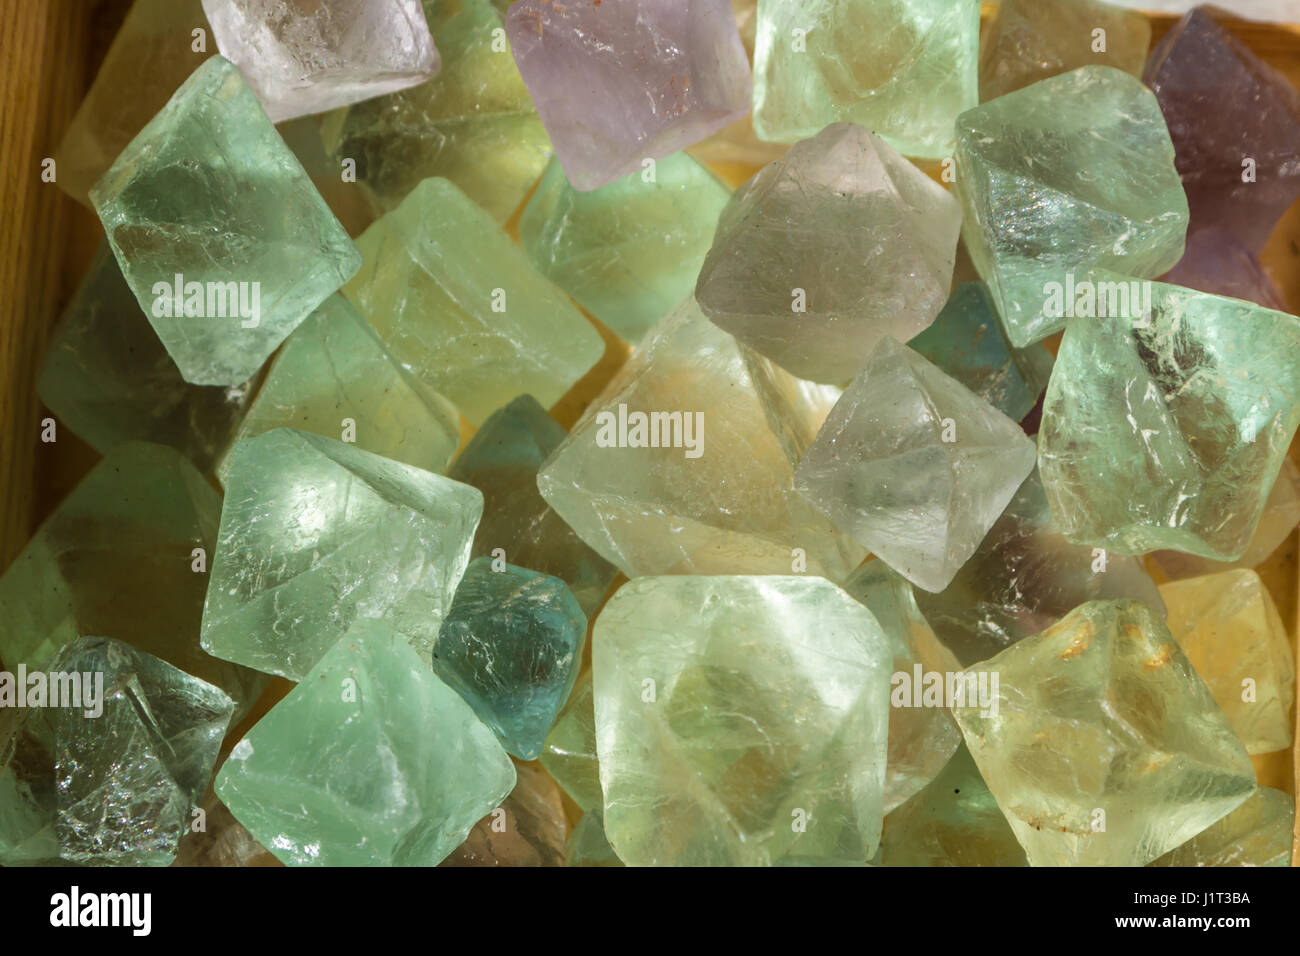 Fluorite crystals used for health, wellbeing and industry Stock Photo